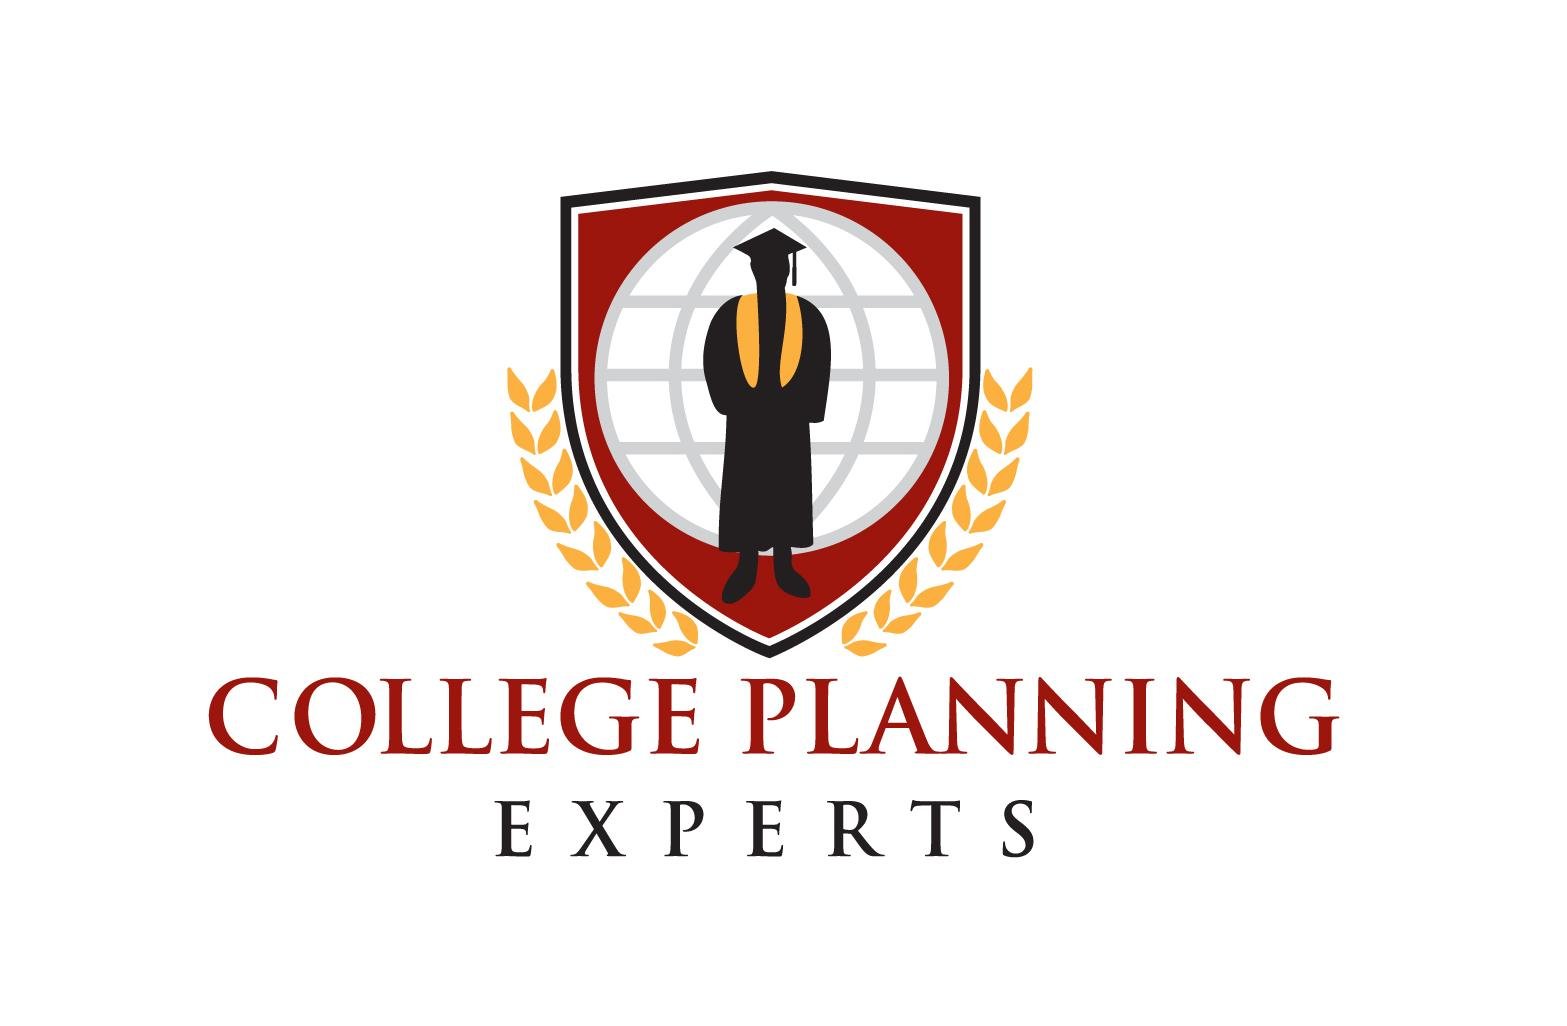 Get A Free Ride To College In Illinois With College Grant Advice From This Firm